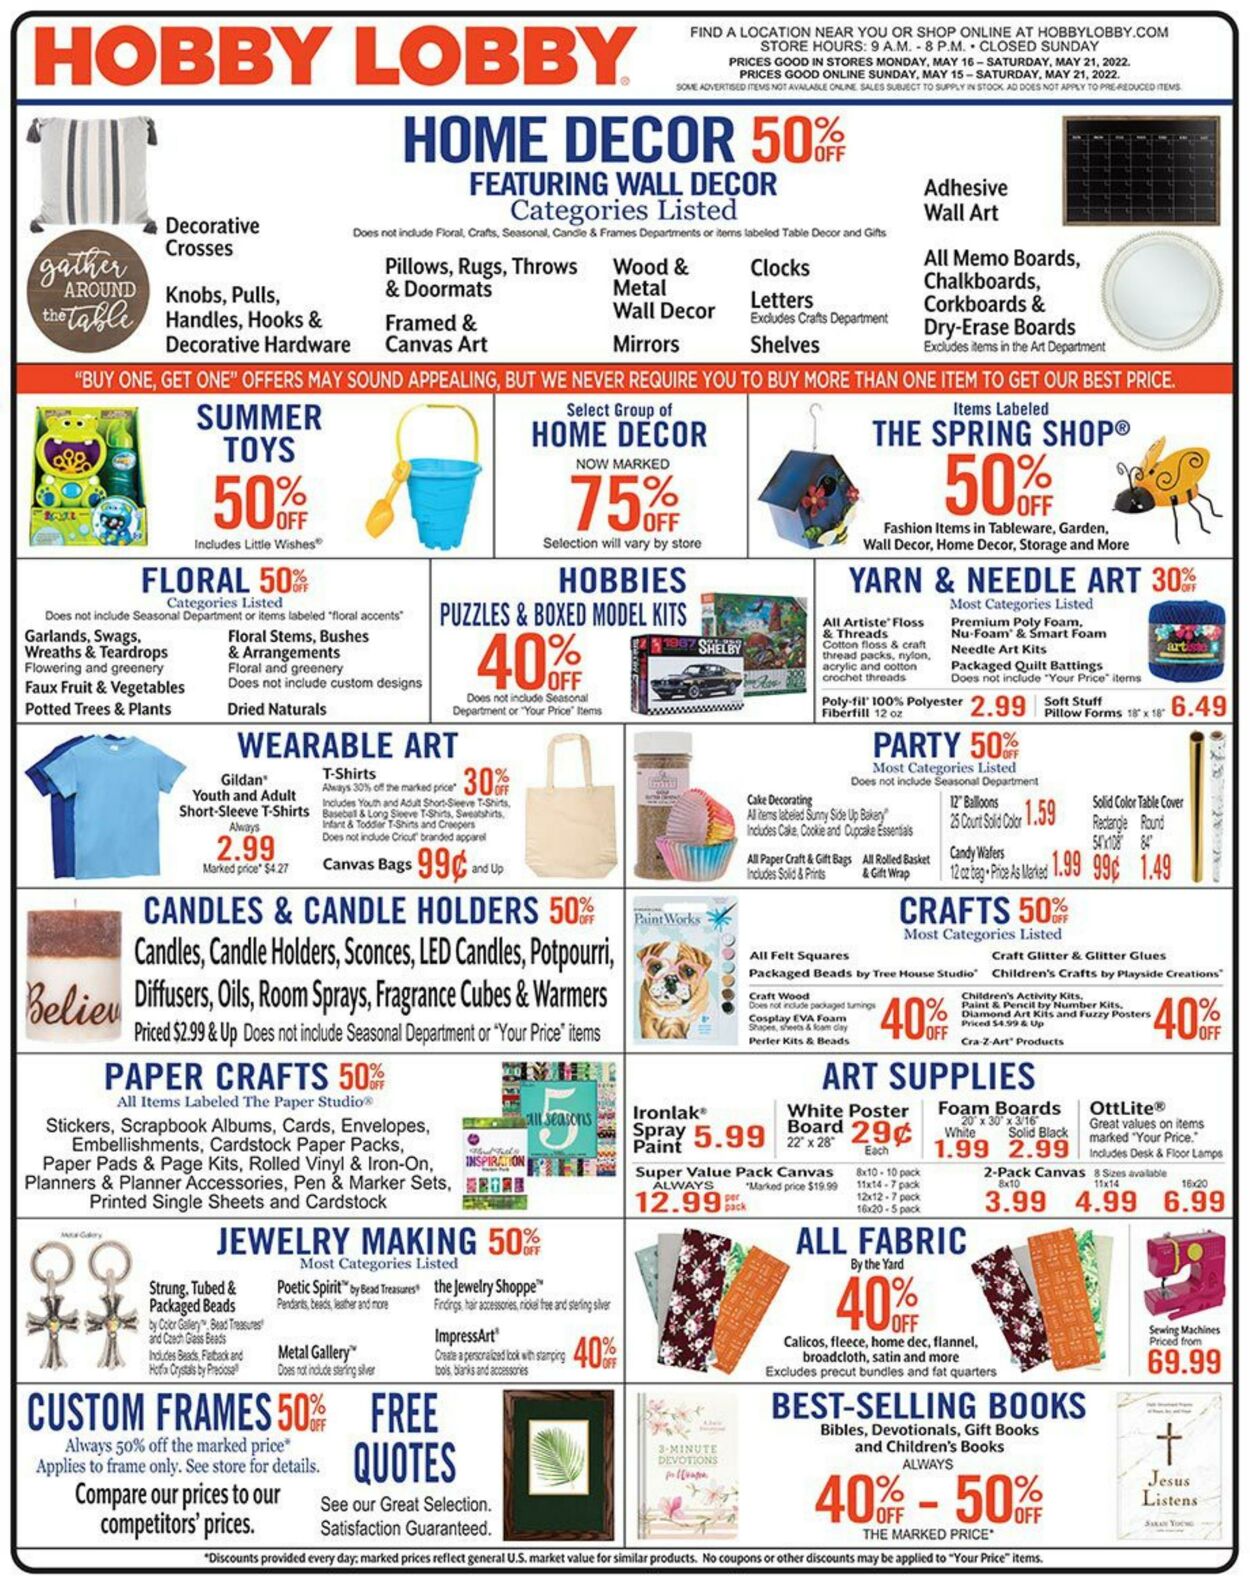 Hobby Lobby Promotional weekly ads